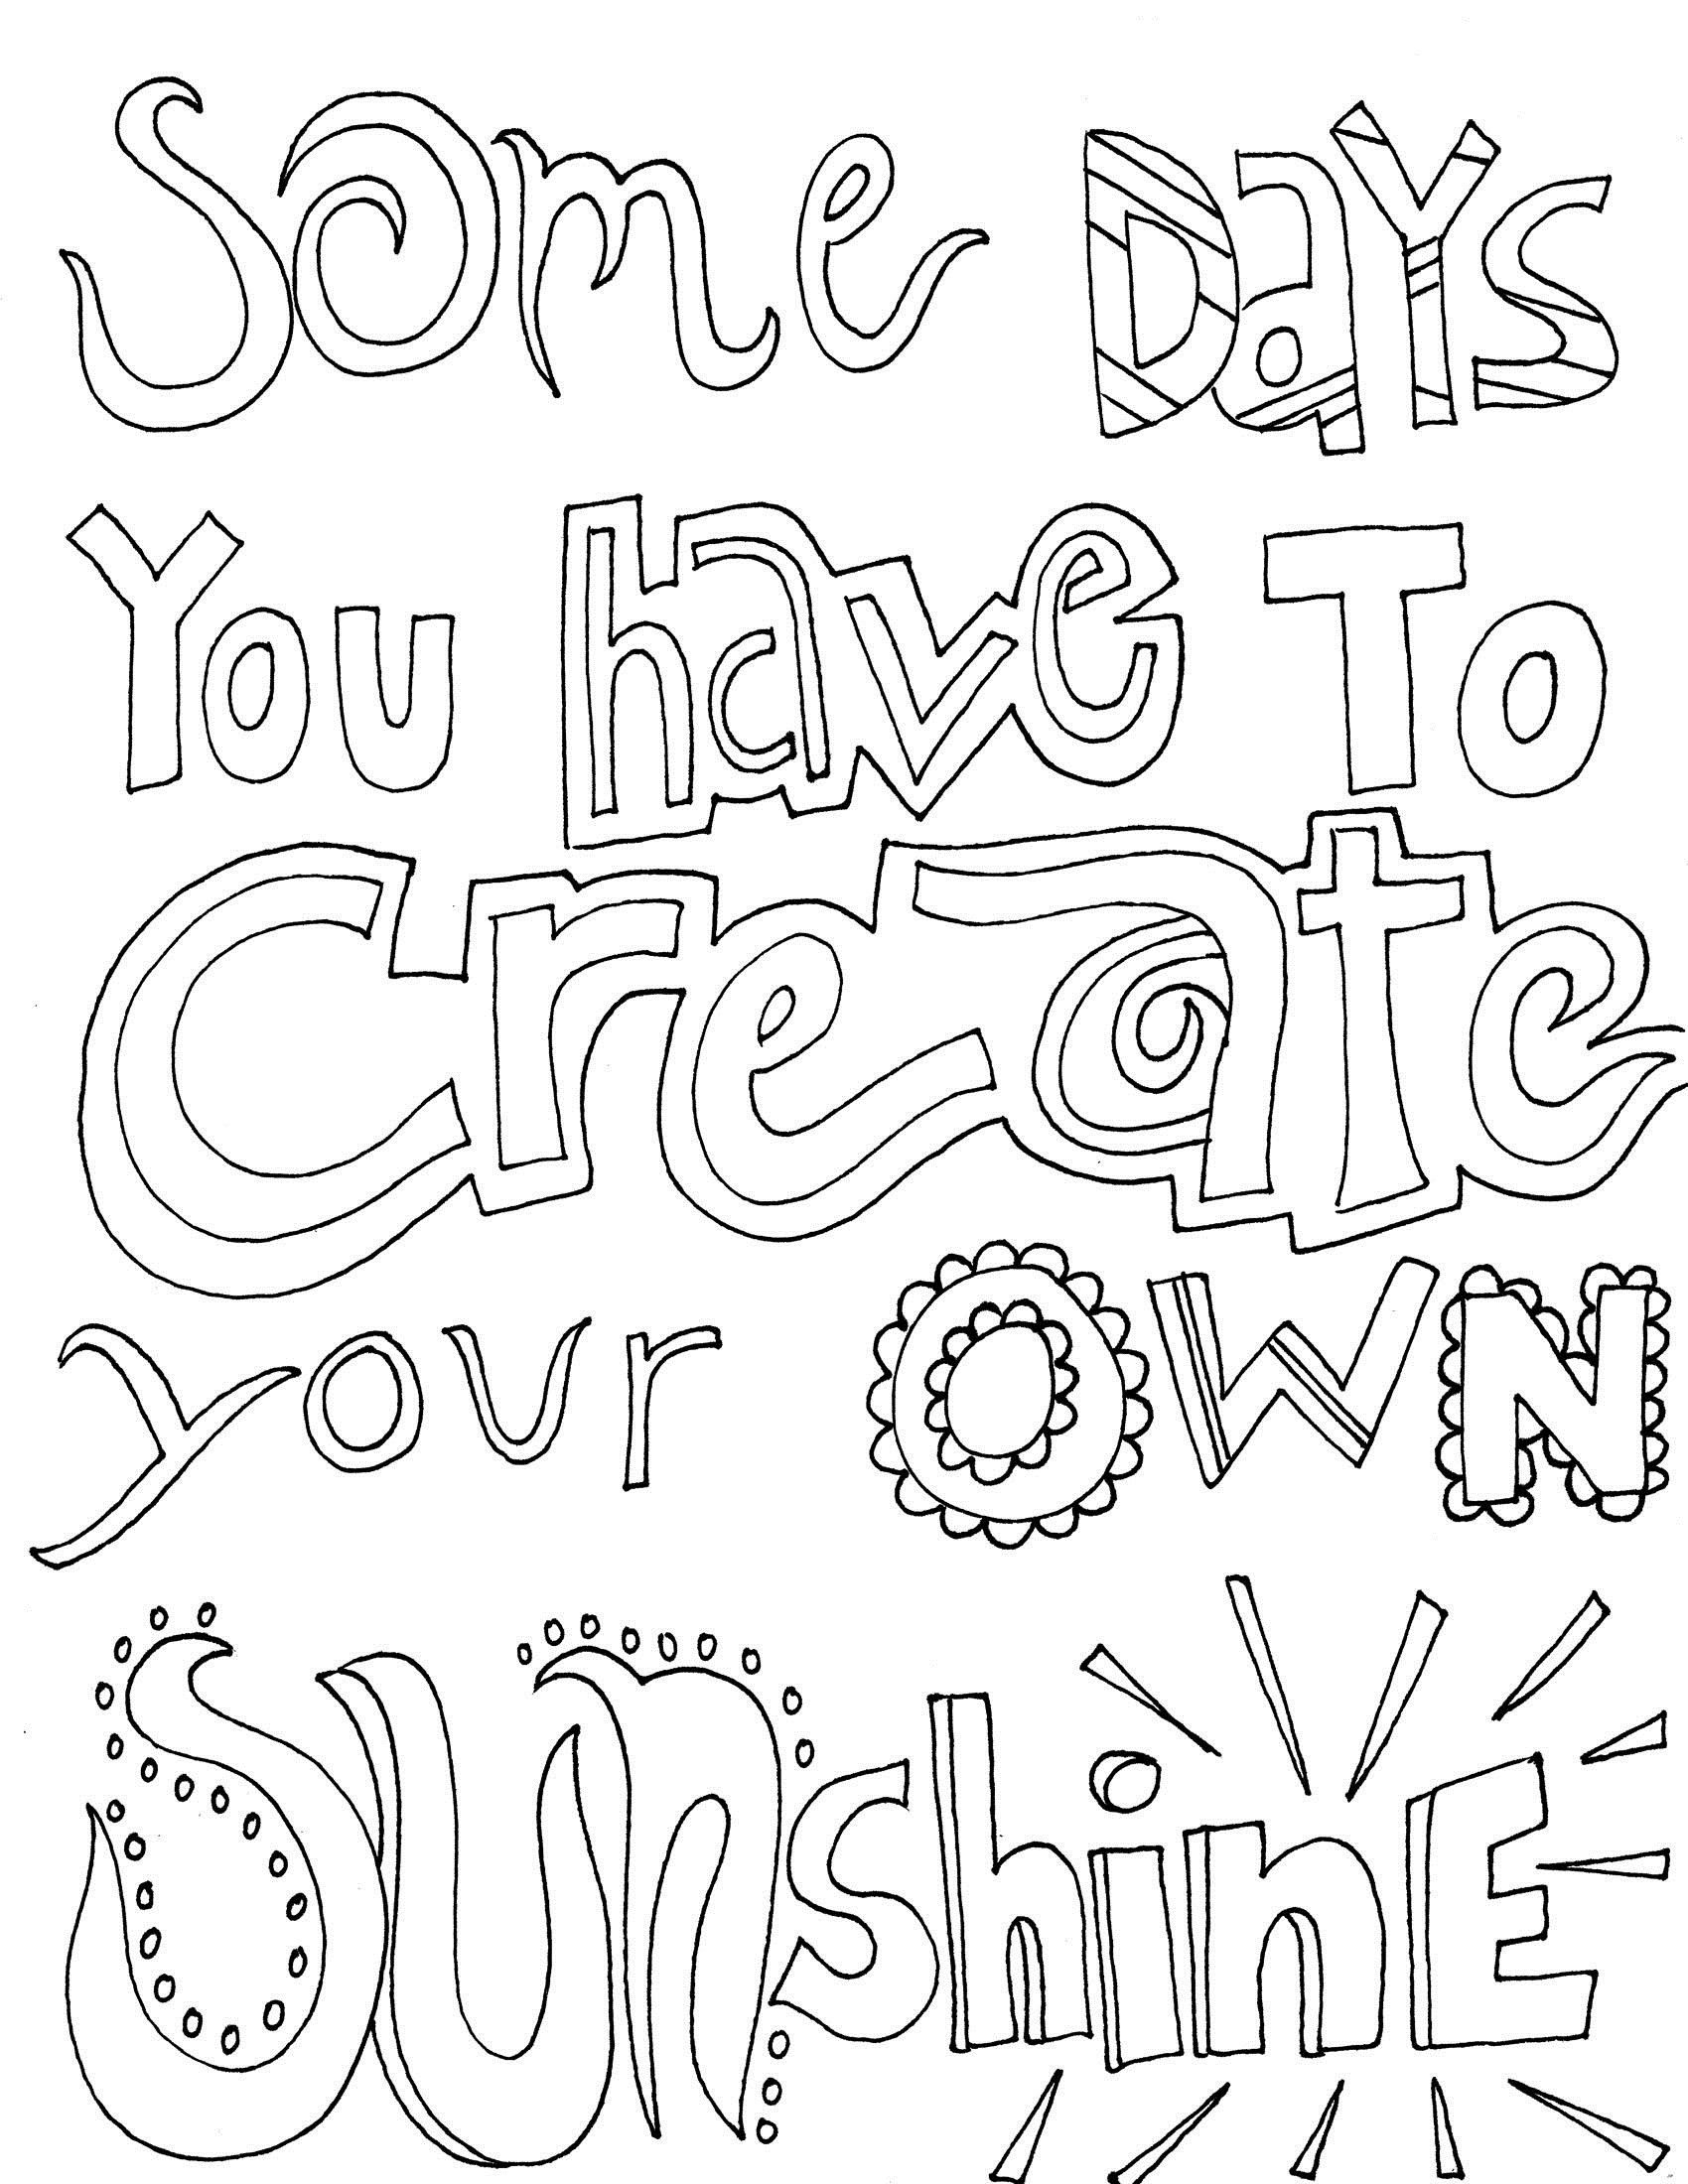 Quote and Sayings Coloring Pages | Quote coloring pages, Coloring ...